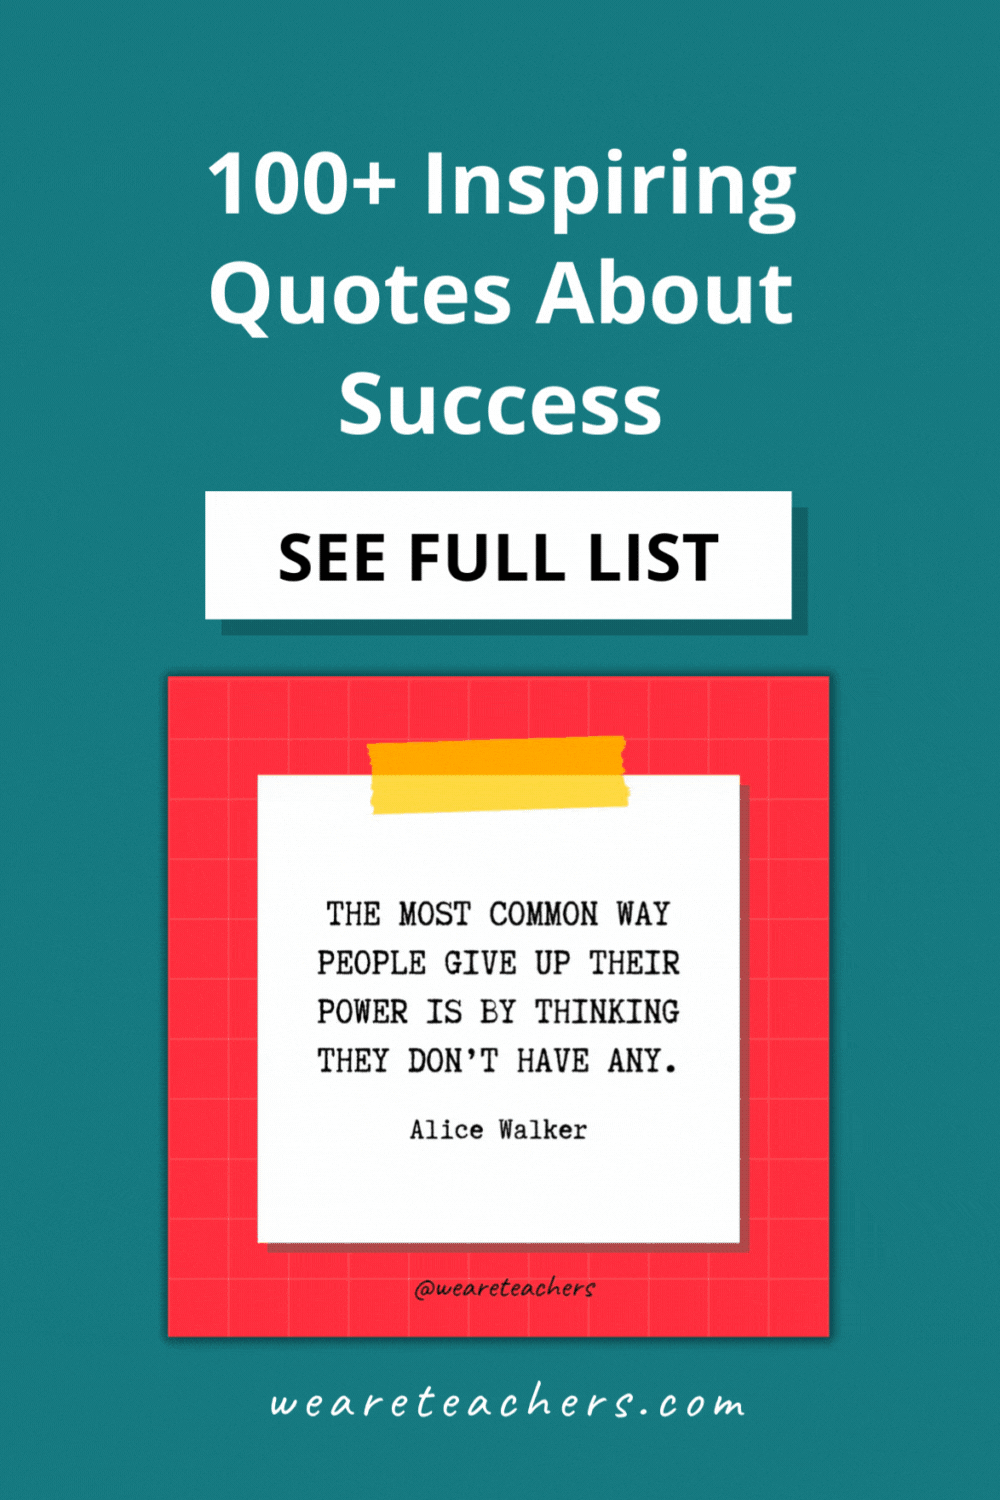 Want to motivate your students toward success? Try sharing one or more of these quotes about success during your next class meeting!